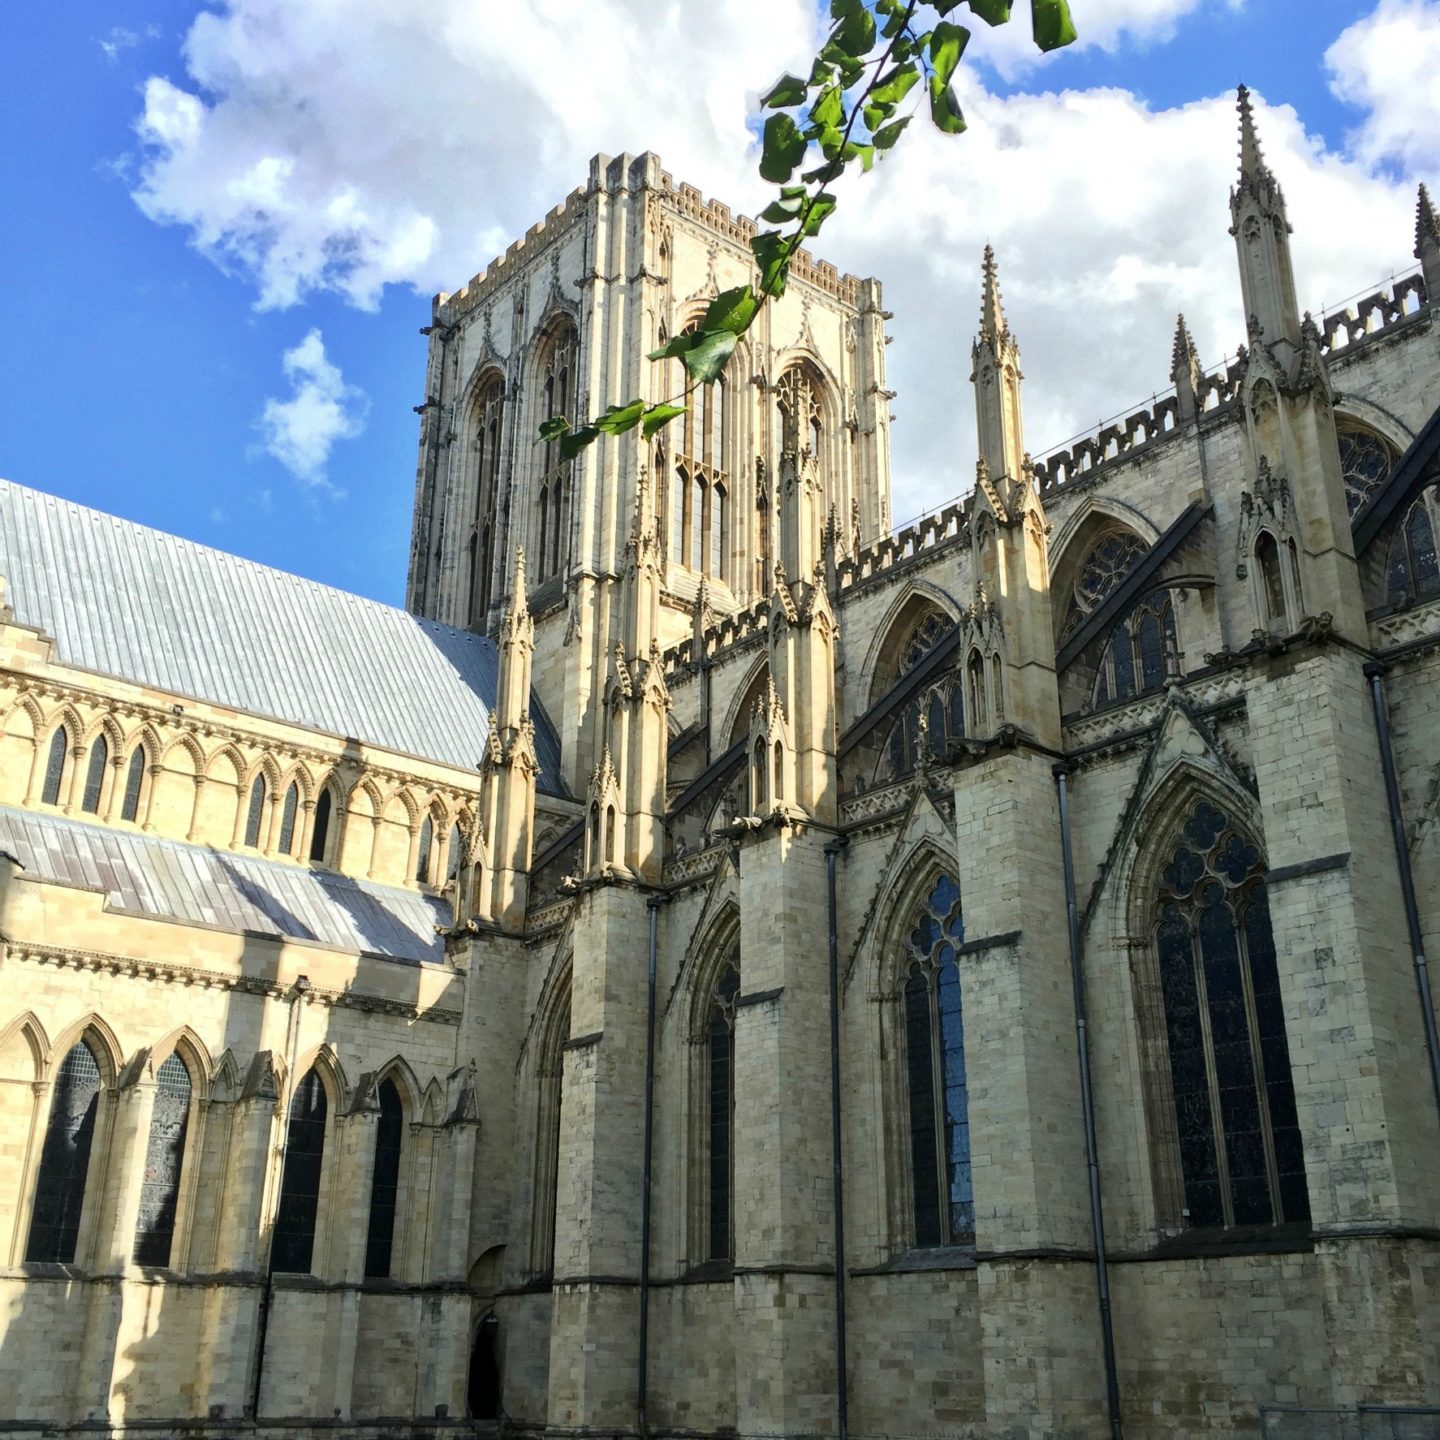 Visit to city of York